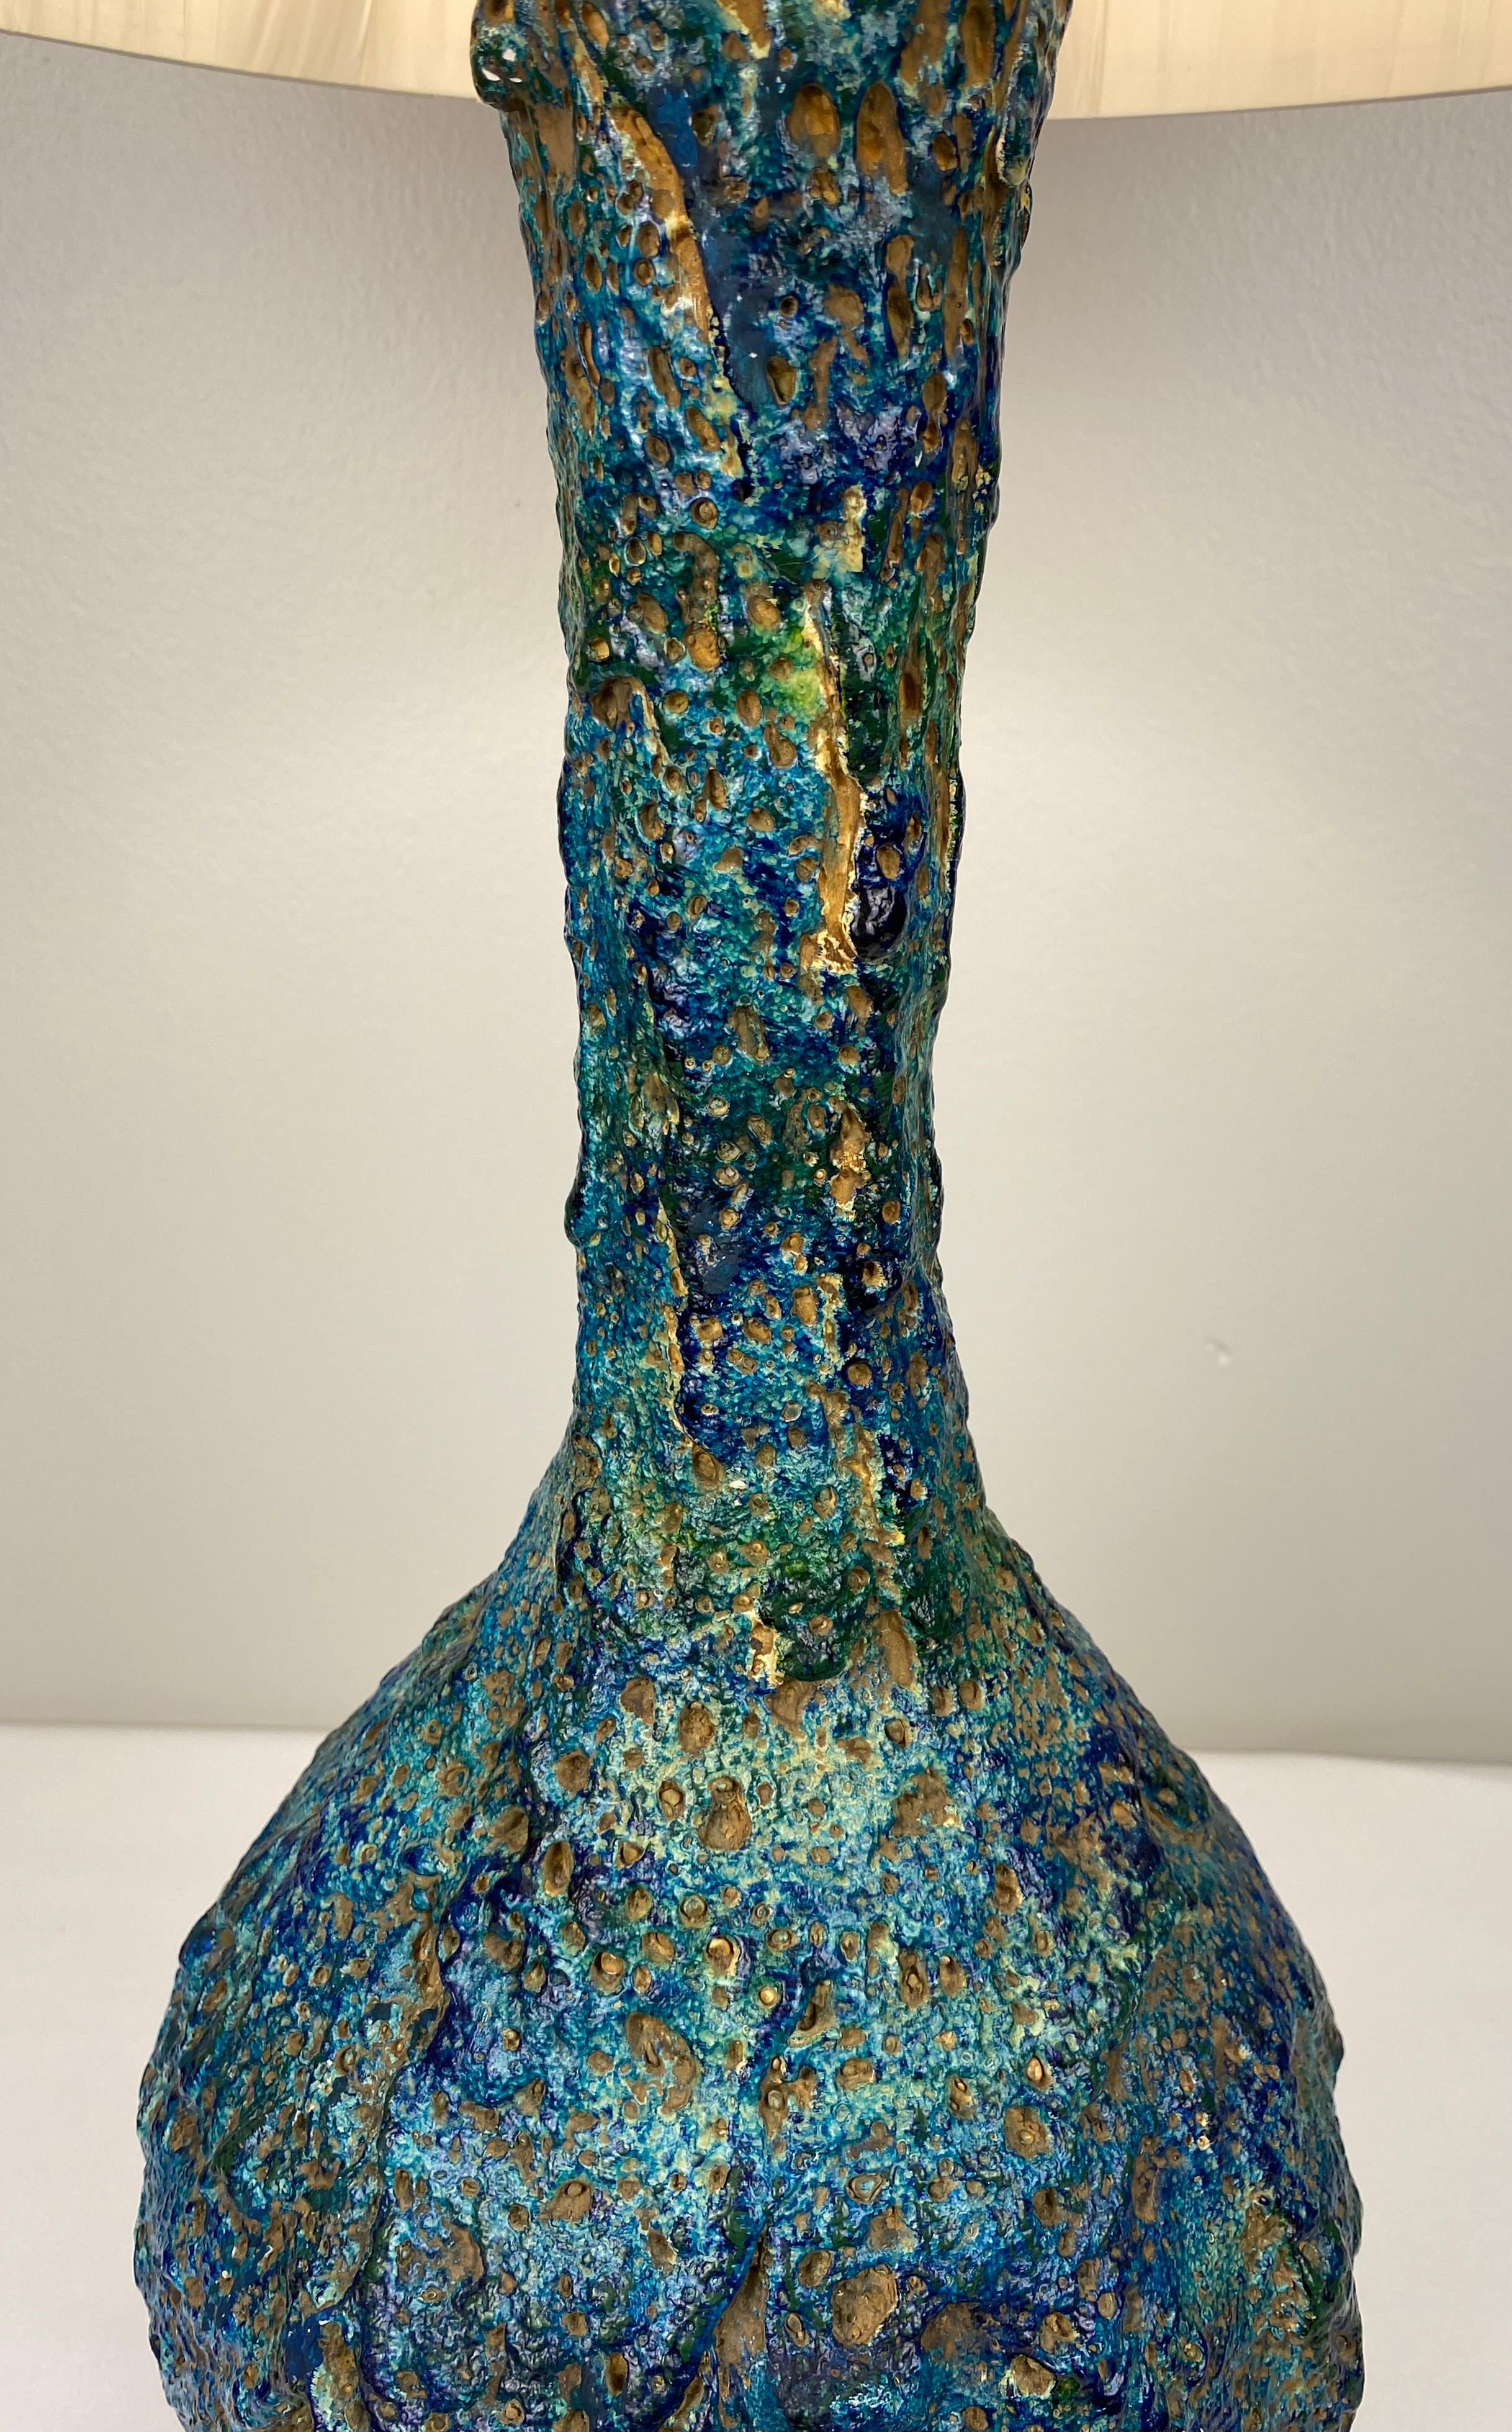 Large and very decorative ceramic table lamp from France. Very attractive mid-century modern ceramic table lamp with beautiful blue colors and a great form. This lamp has notable sculptural work.  Quite unique with a glamorous appearance. 

This